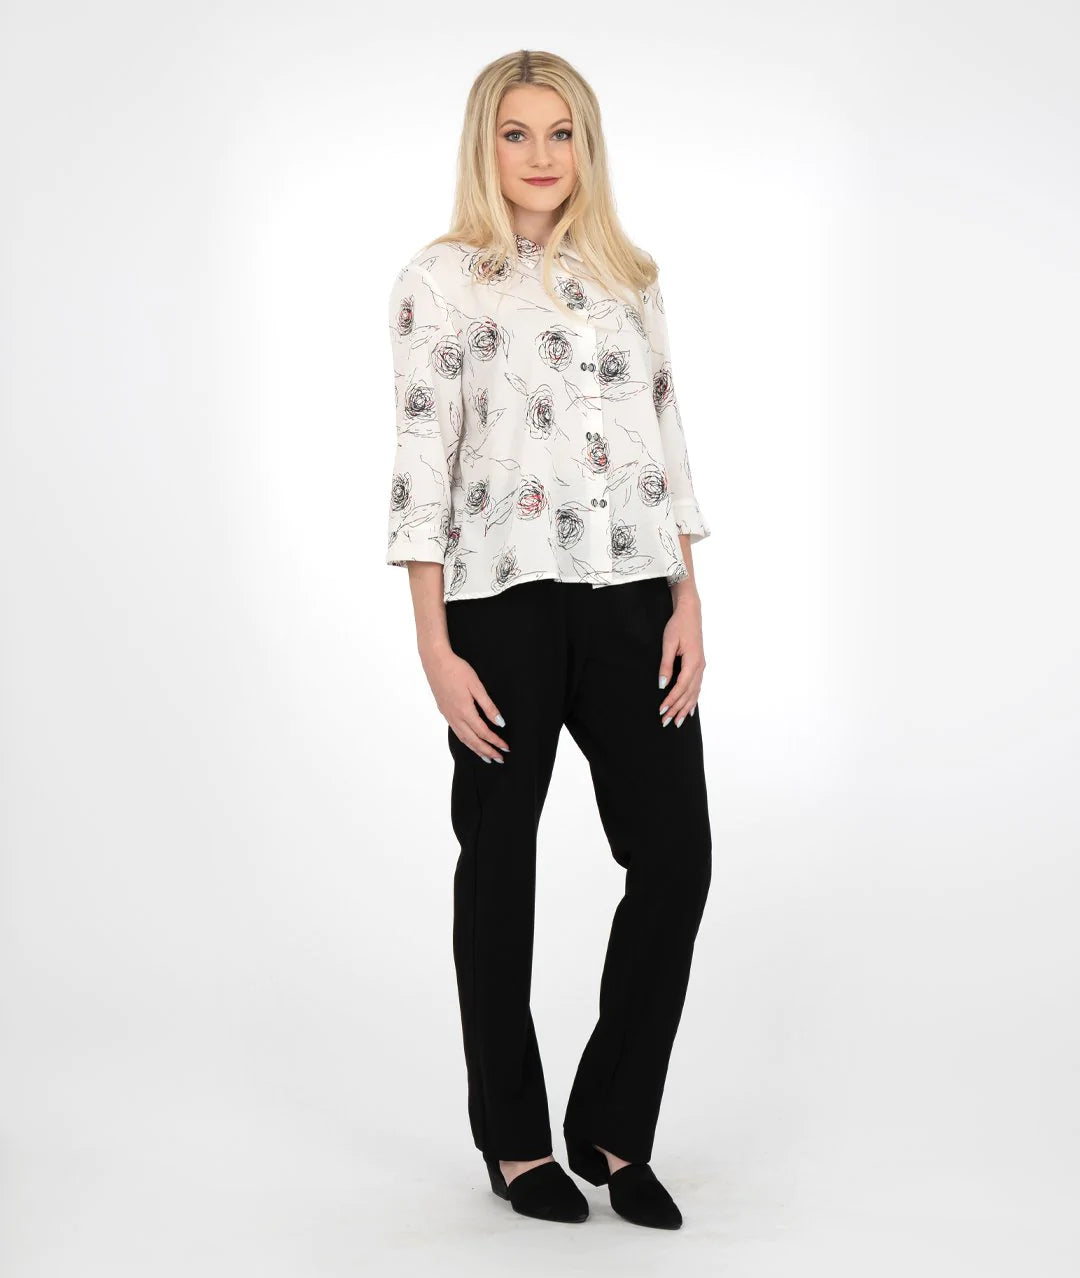 model in a white buttoned blouse with a red and black rose print, worn with black pants 